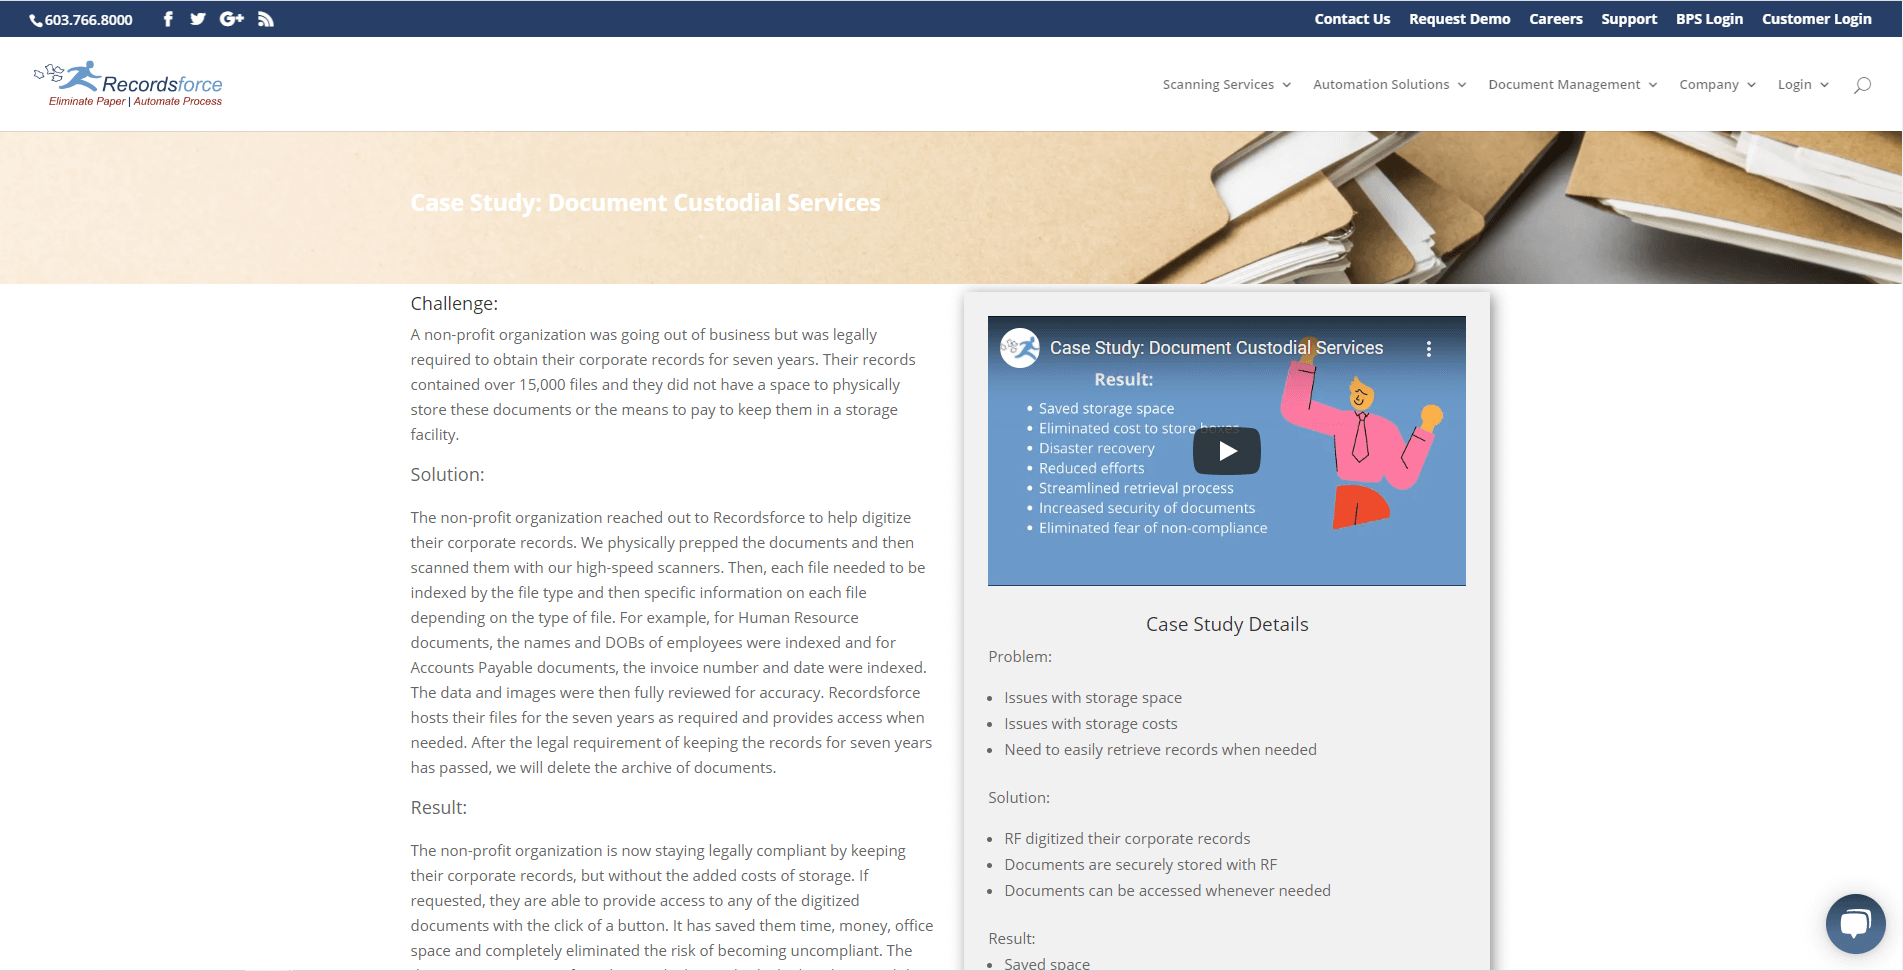 screenshot of document custodial services case study